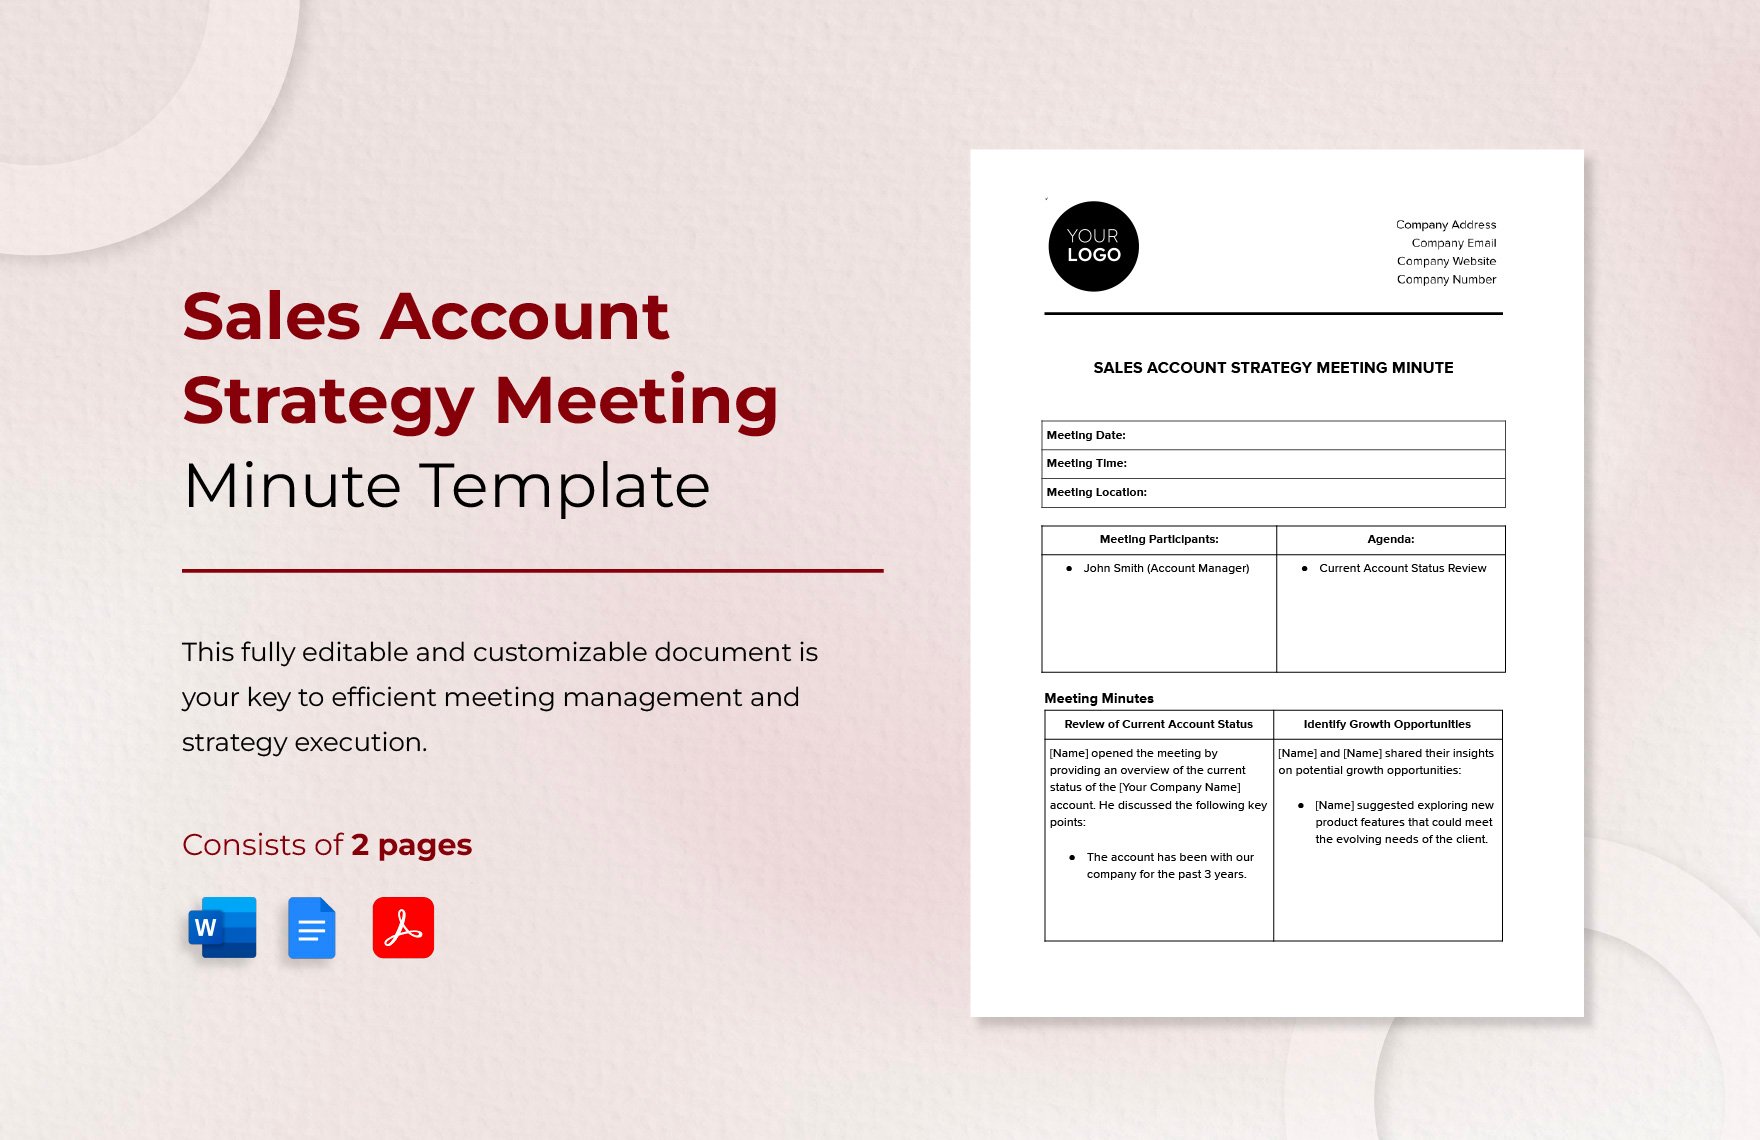 Sales Account Strategy Meeting Minute Template in Word, Google Docs, PDF